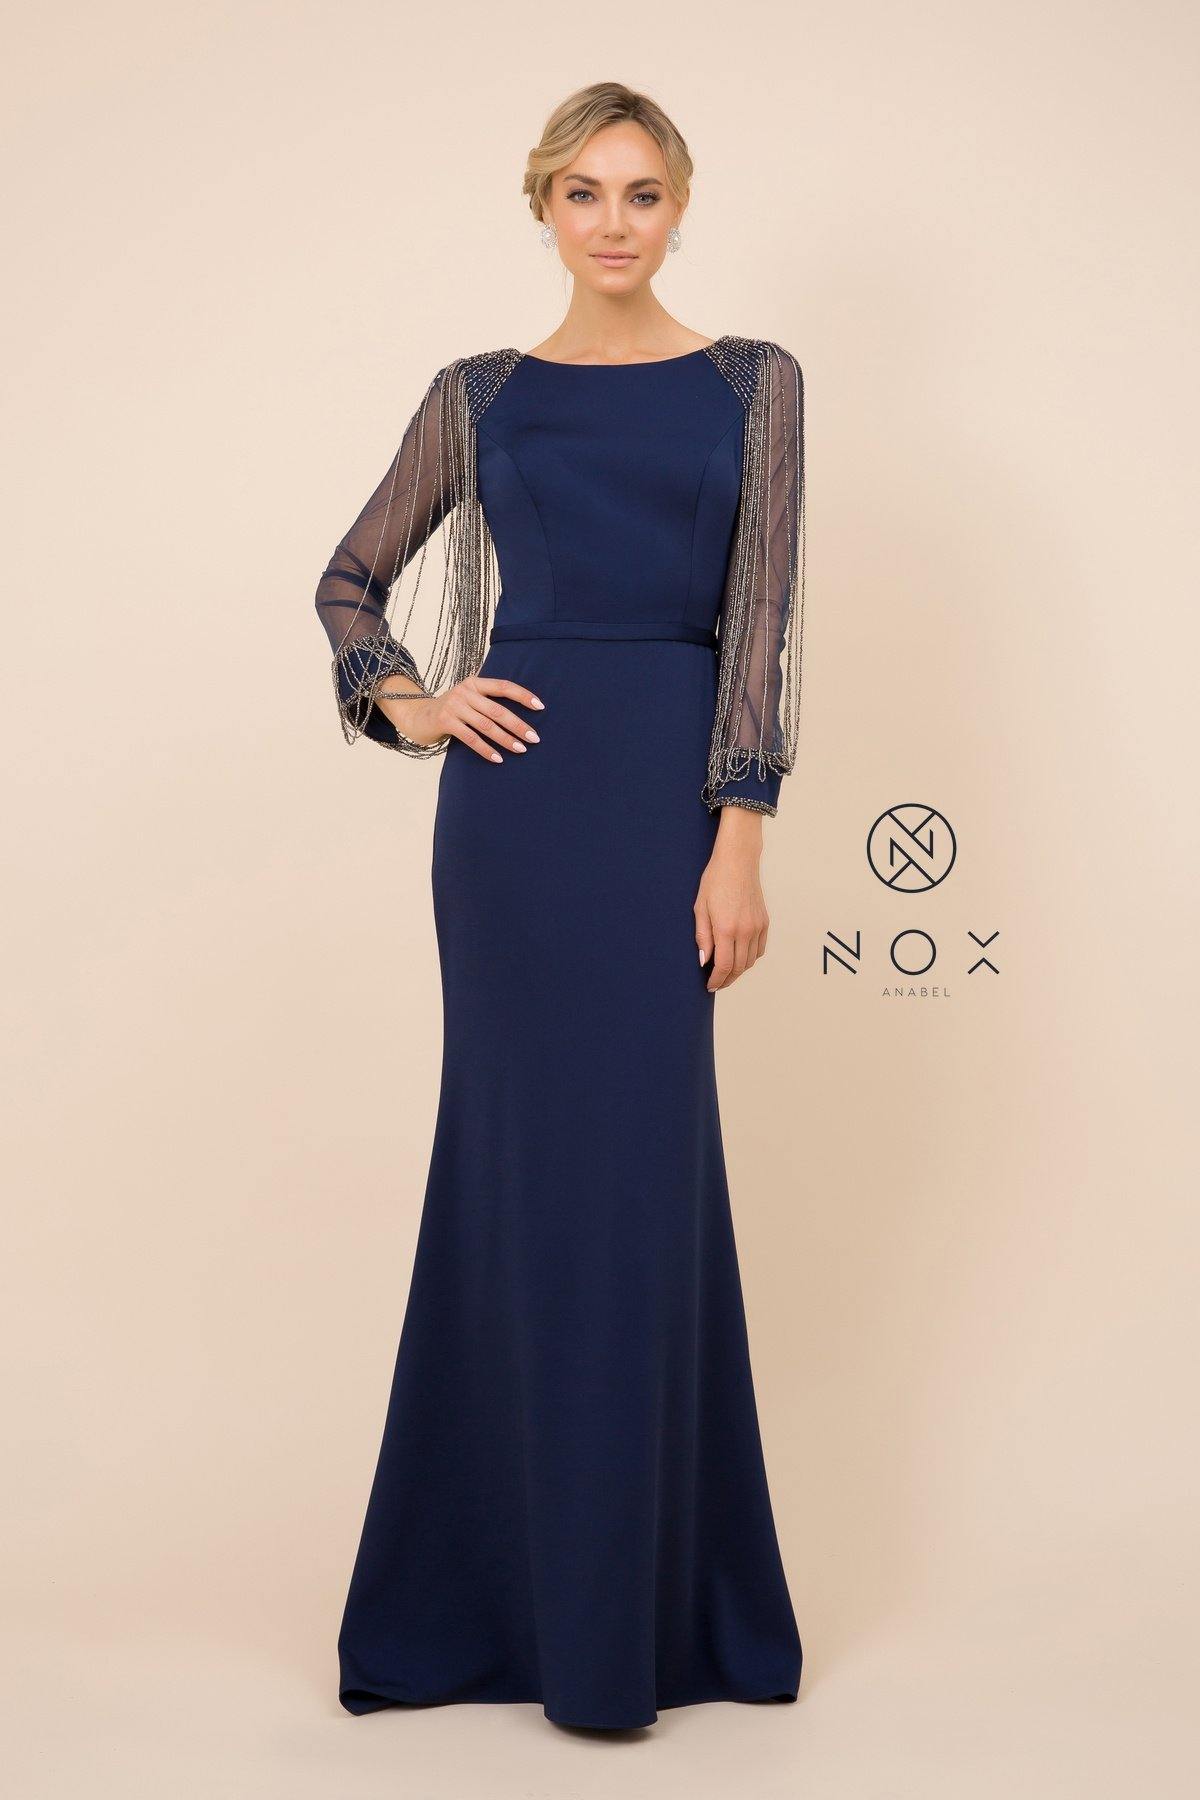 Long Fitted Prom Dress Formal - The Dress Outlet Nox Anabel